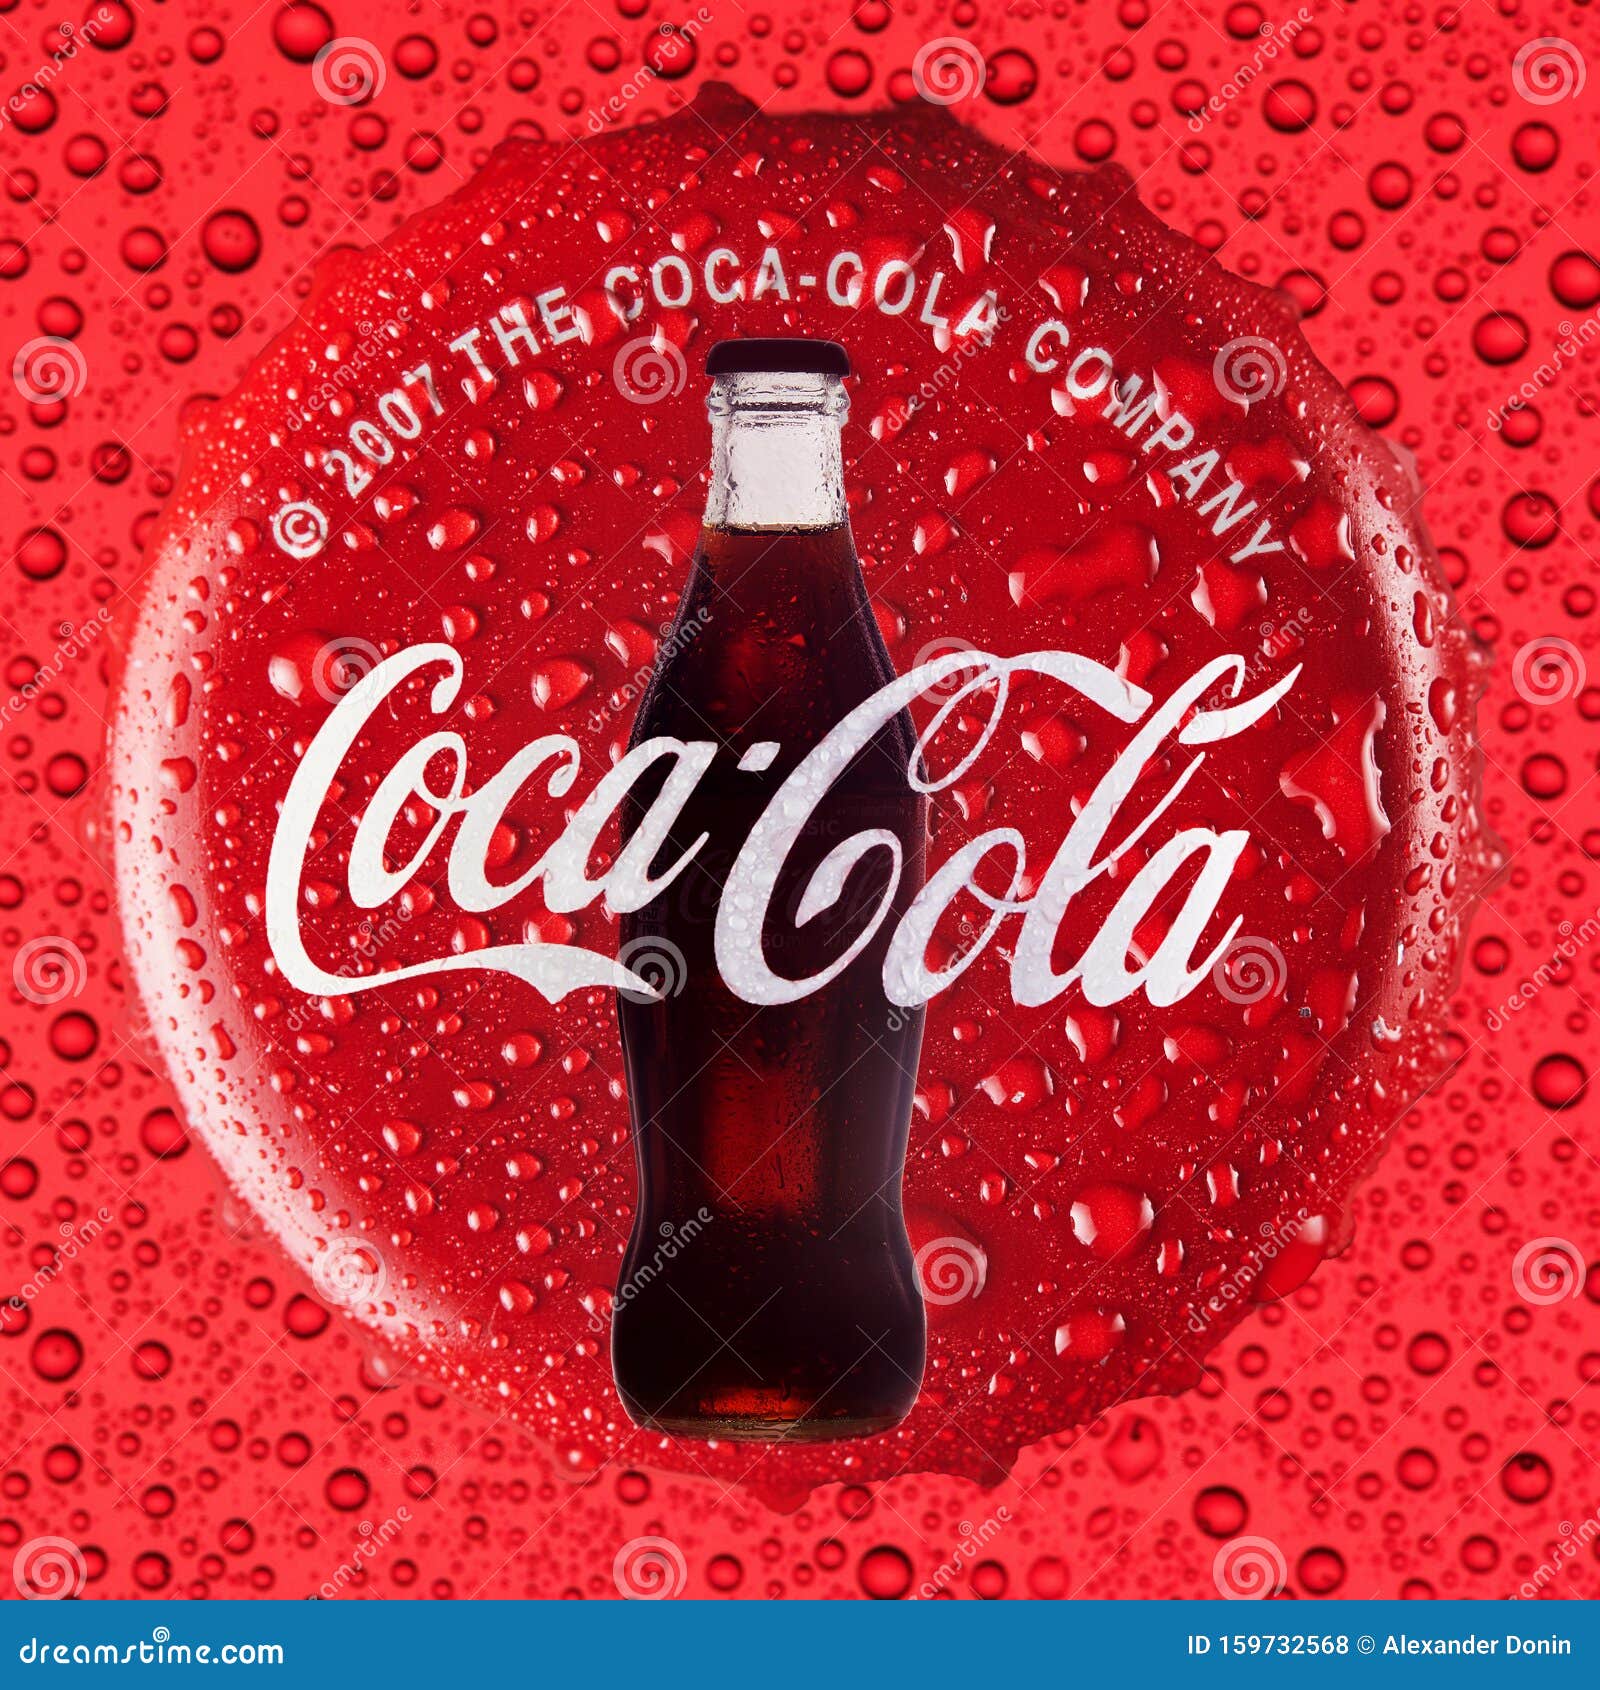 Coca Cola Drink Concept on a Red Background with a Cap and a Bottle with  Drops Editorial Stock Photo - Image of corporation, concept: 159732568